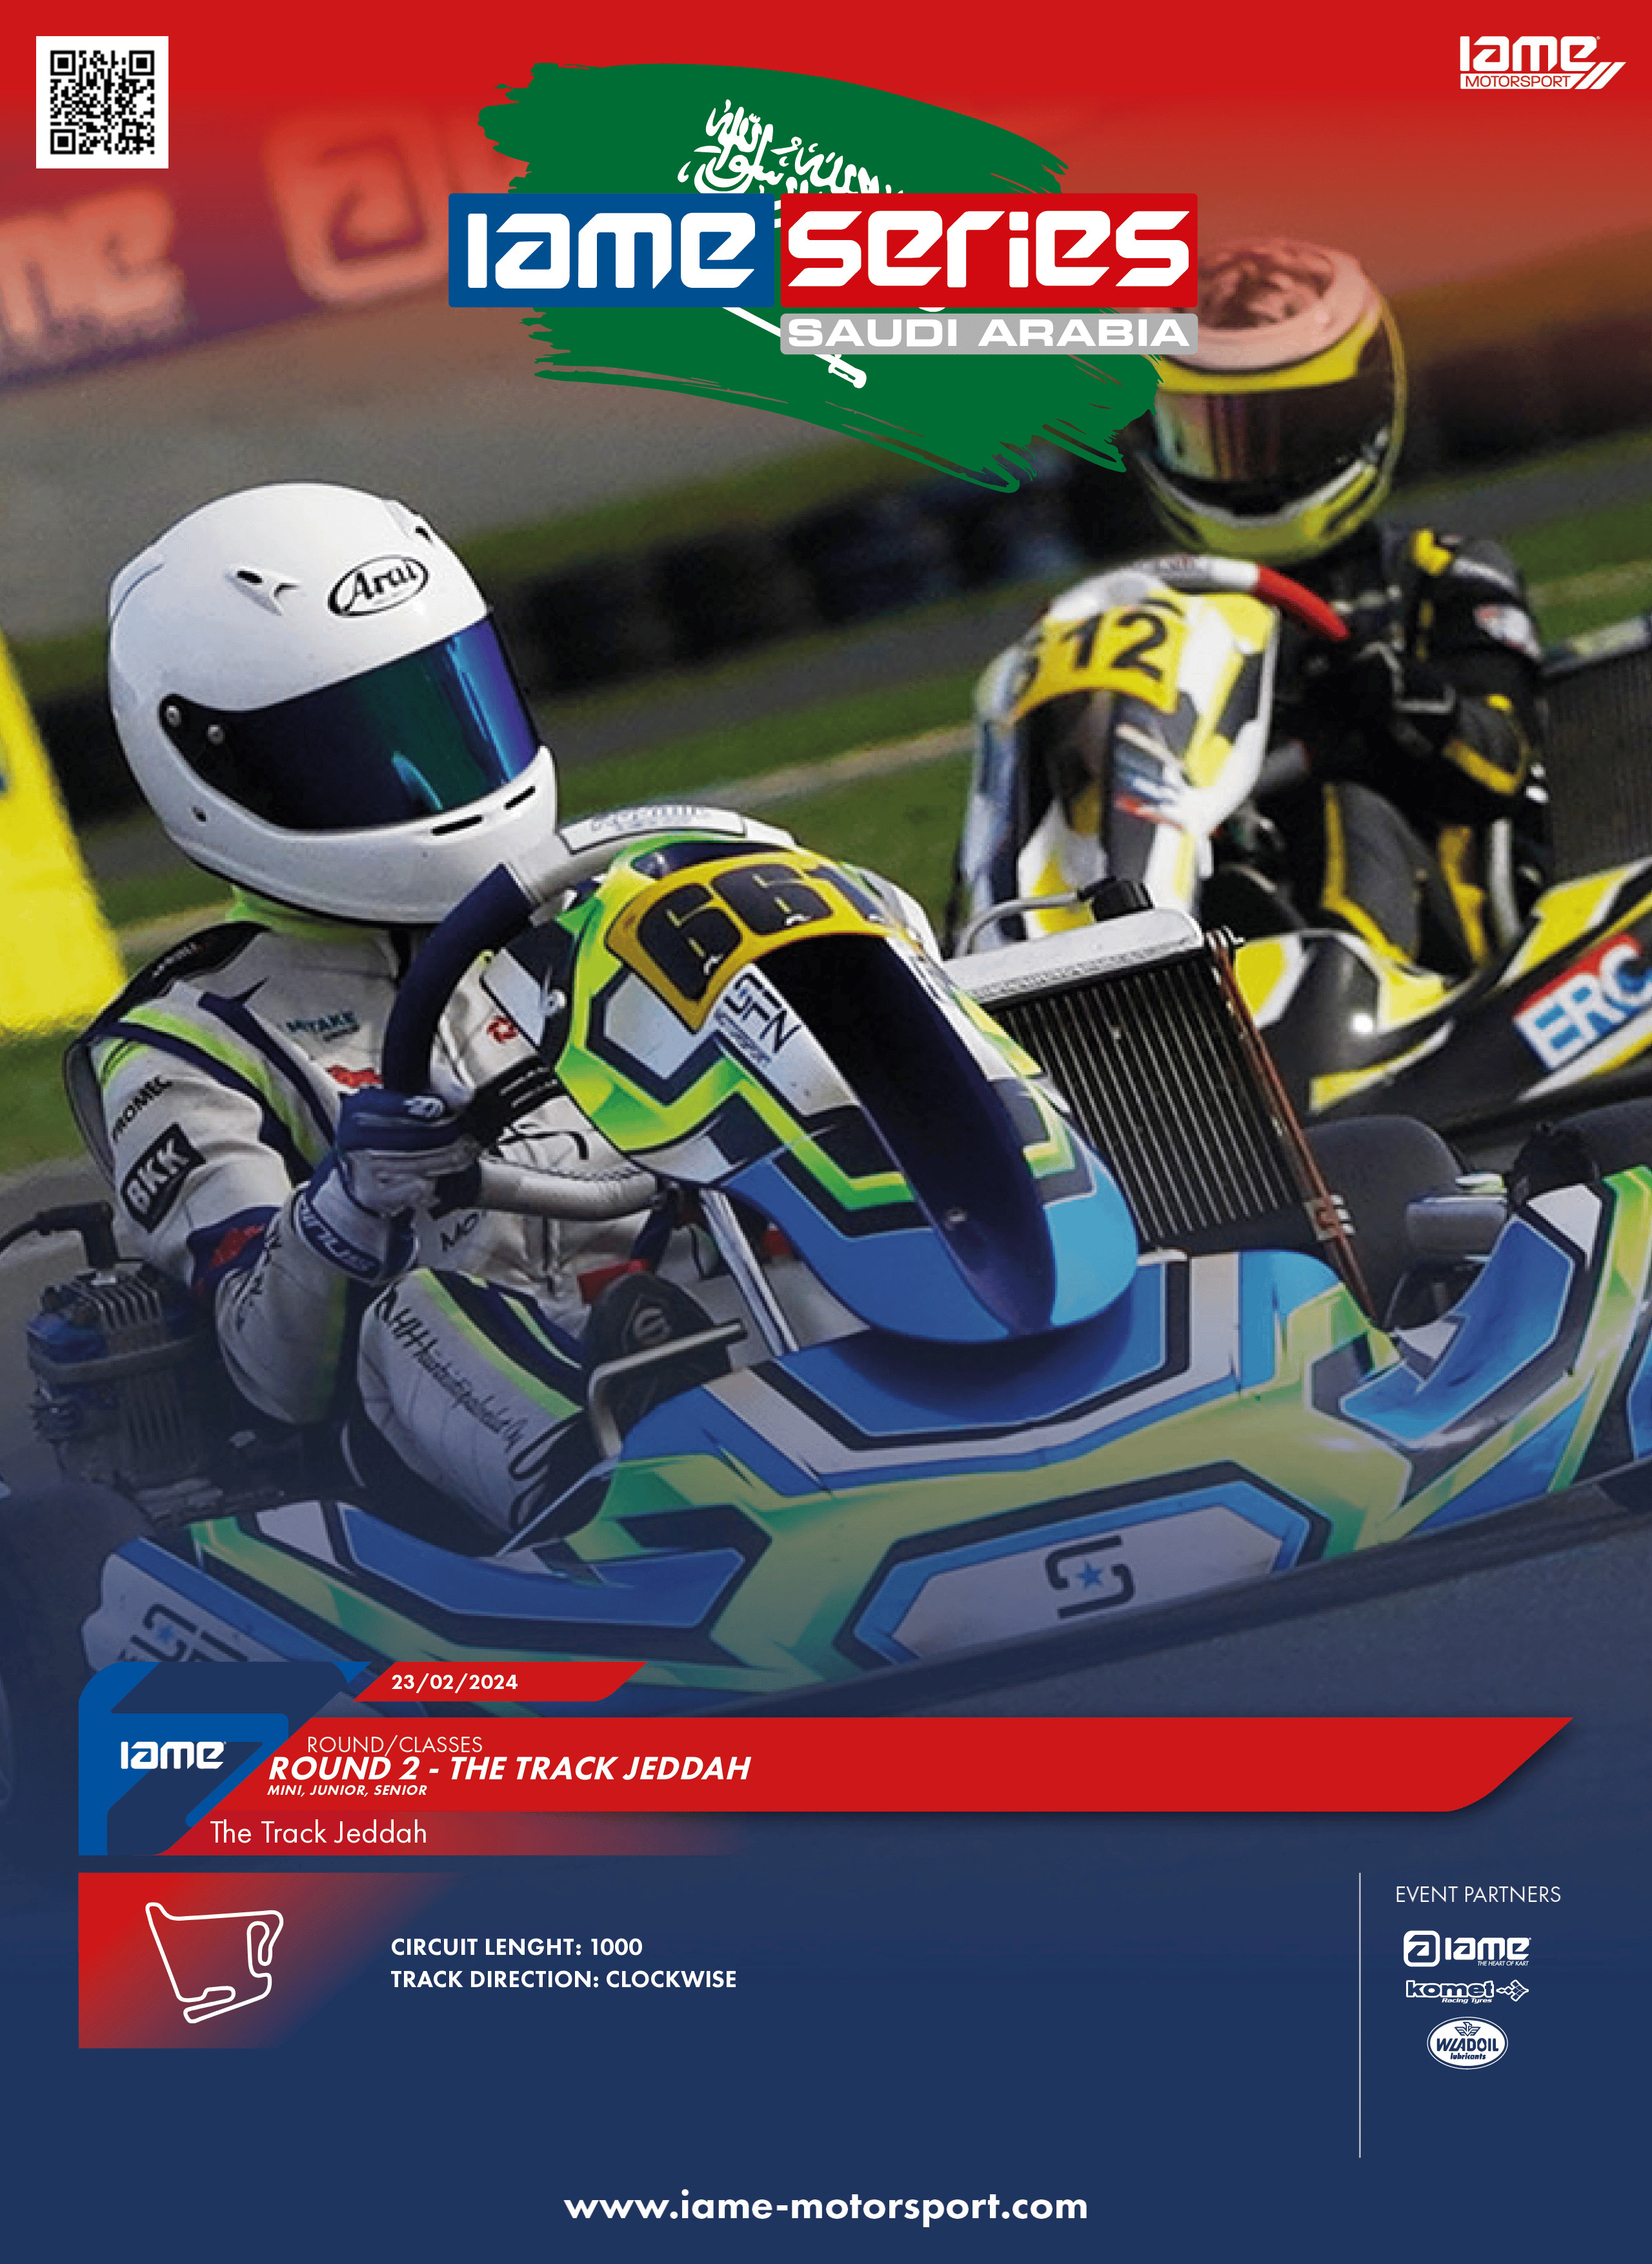 Karting Thrills in the Heart of Jeddah: IAME Series Saudi Arabia's Round 2 at The Track!